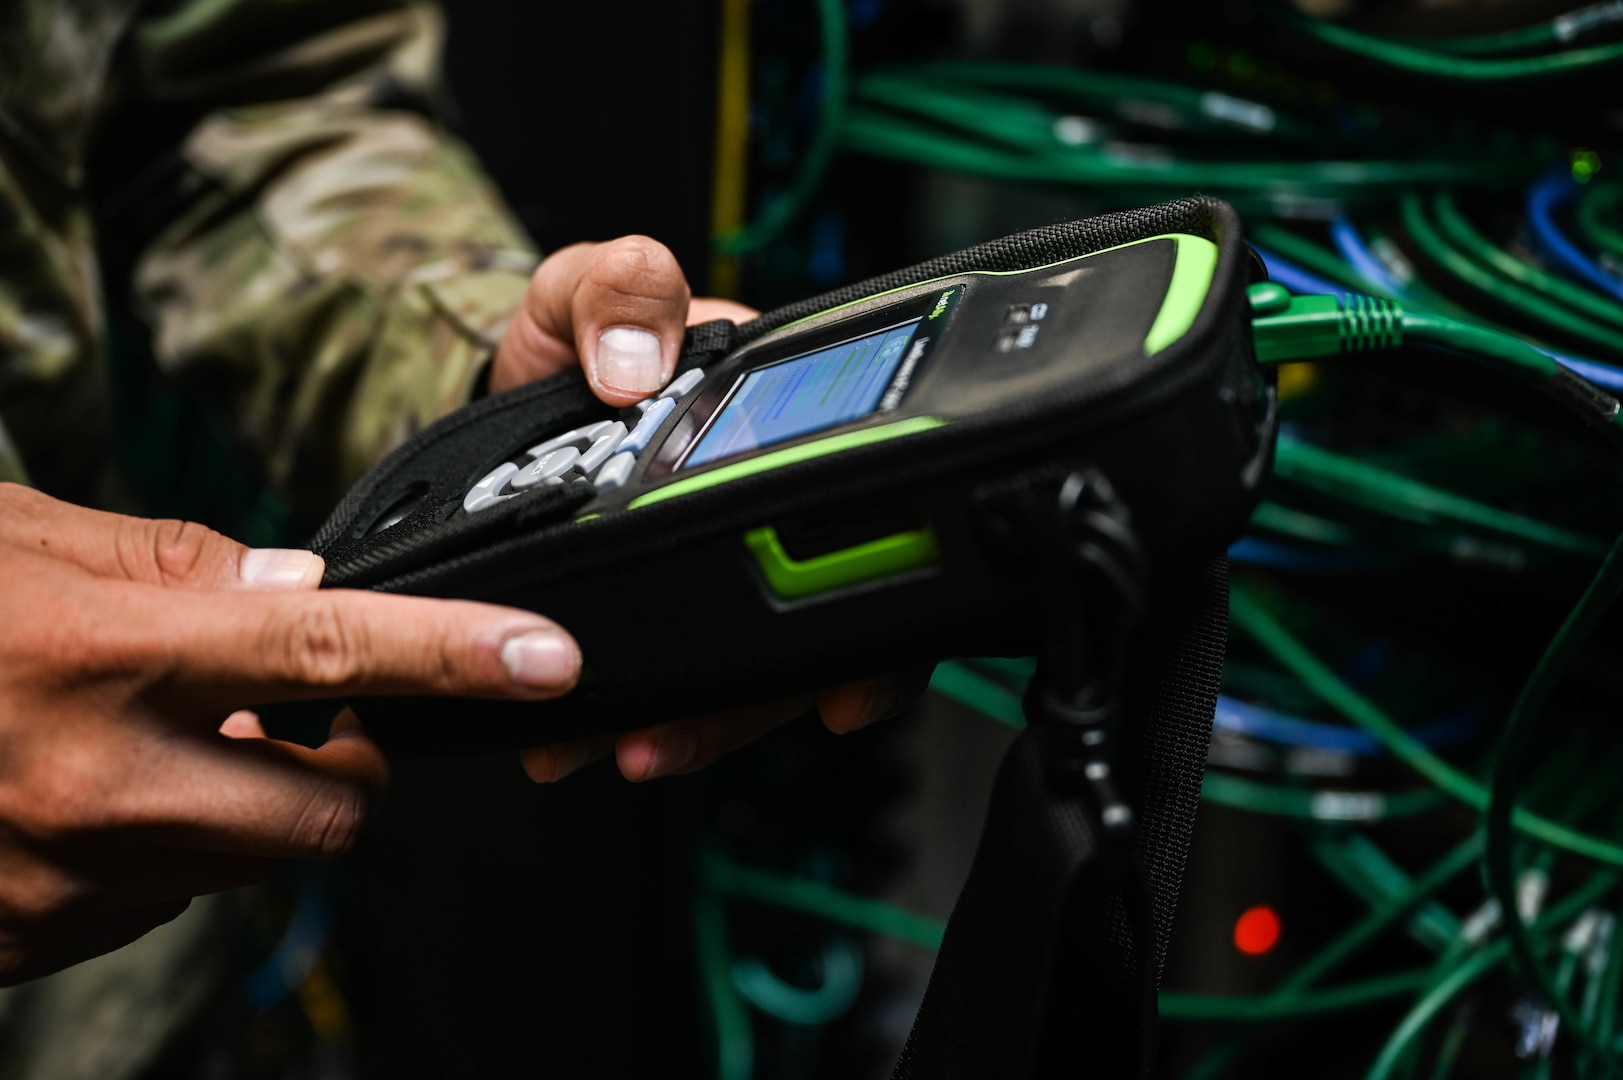 Staff Sgt. Deangelo Johnson, 15th Medical Group Medical Information Systems Flight noncommissioned officer in-charge, utilizes a LinkRunner AT 2000 to test network port activations at Joint Base Pearl Harbor-Hickam, Hawaii, Feb. 24, 2022. The LinkRunner enables MIS personnel with the ability to test network connectivity through the MDG to ensure they meet mission requirements. (U.S. Air Force photo by Staff Sgt. Alan Ricker)